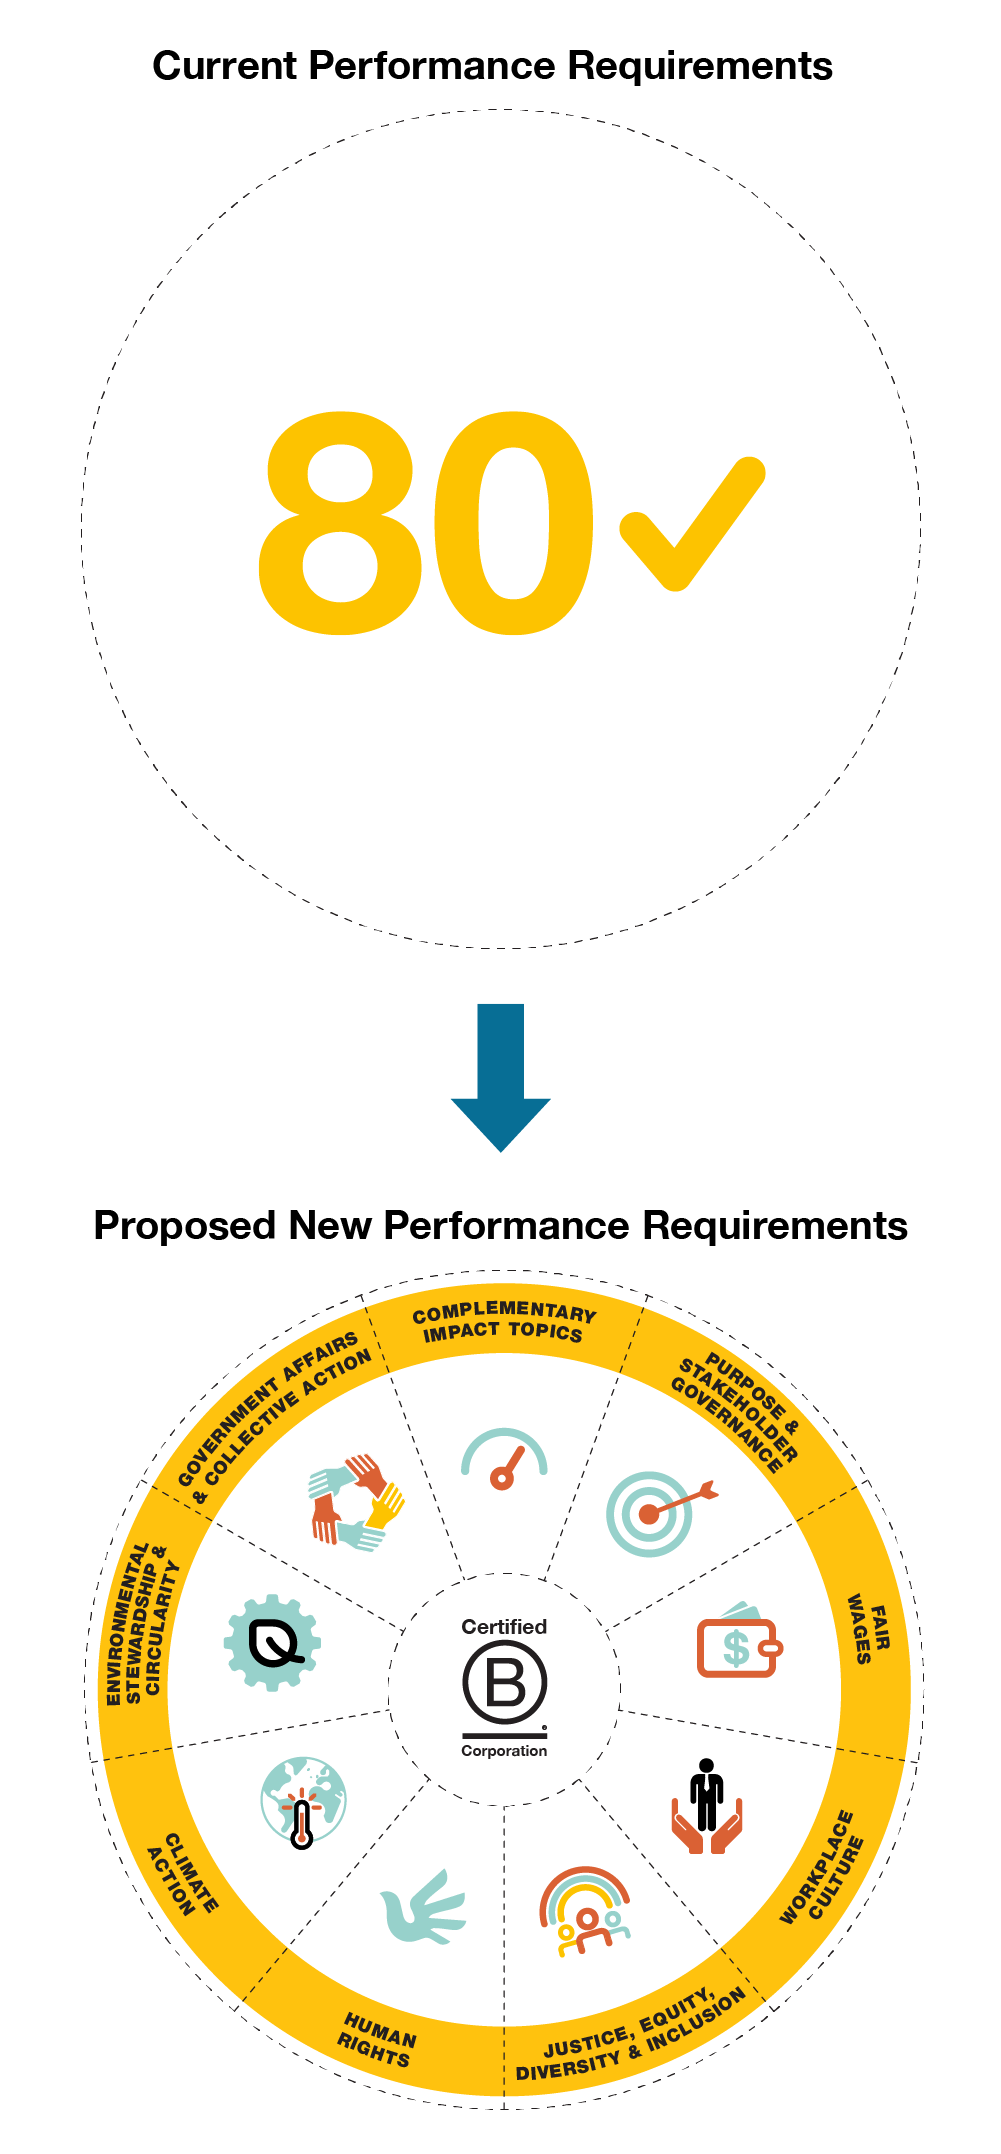 Current B Corp Performance Requirements, companies have a verified 80 point score with flexibility in how to achieve the 80 point score. The Proposed New Performance Requirements, companies need to meet specific Impact Topic requirements and all the requirements will be verified for certification.